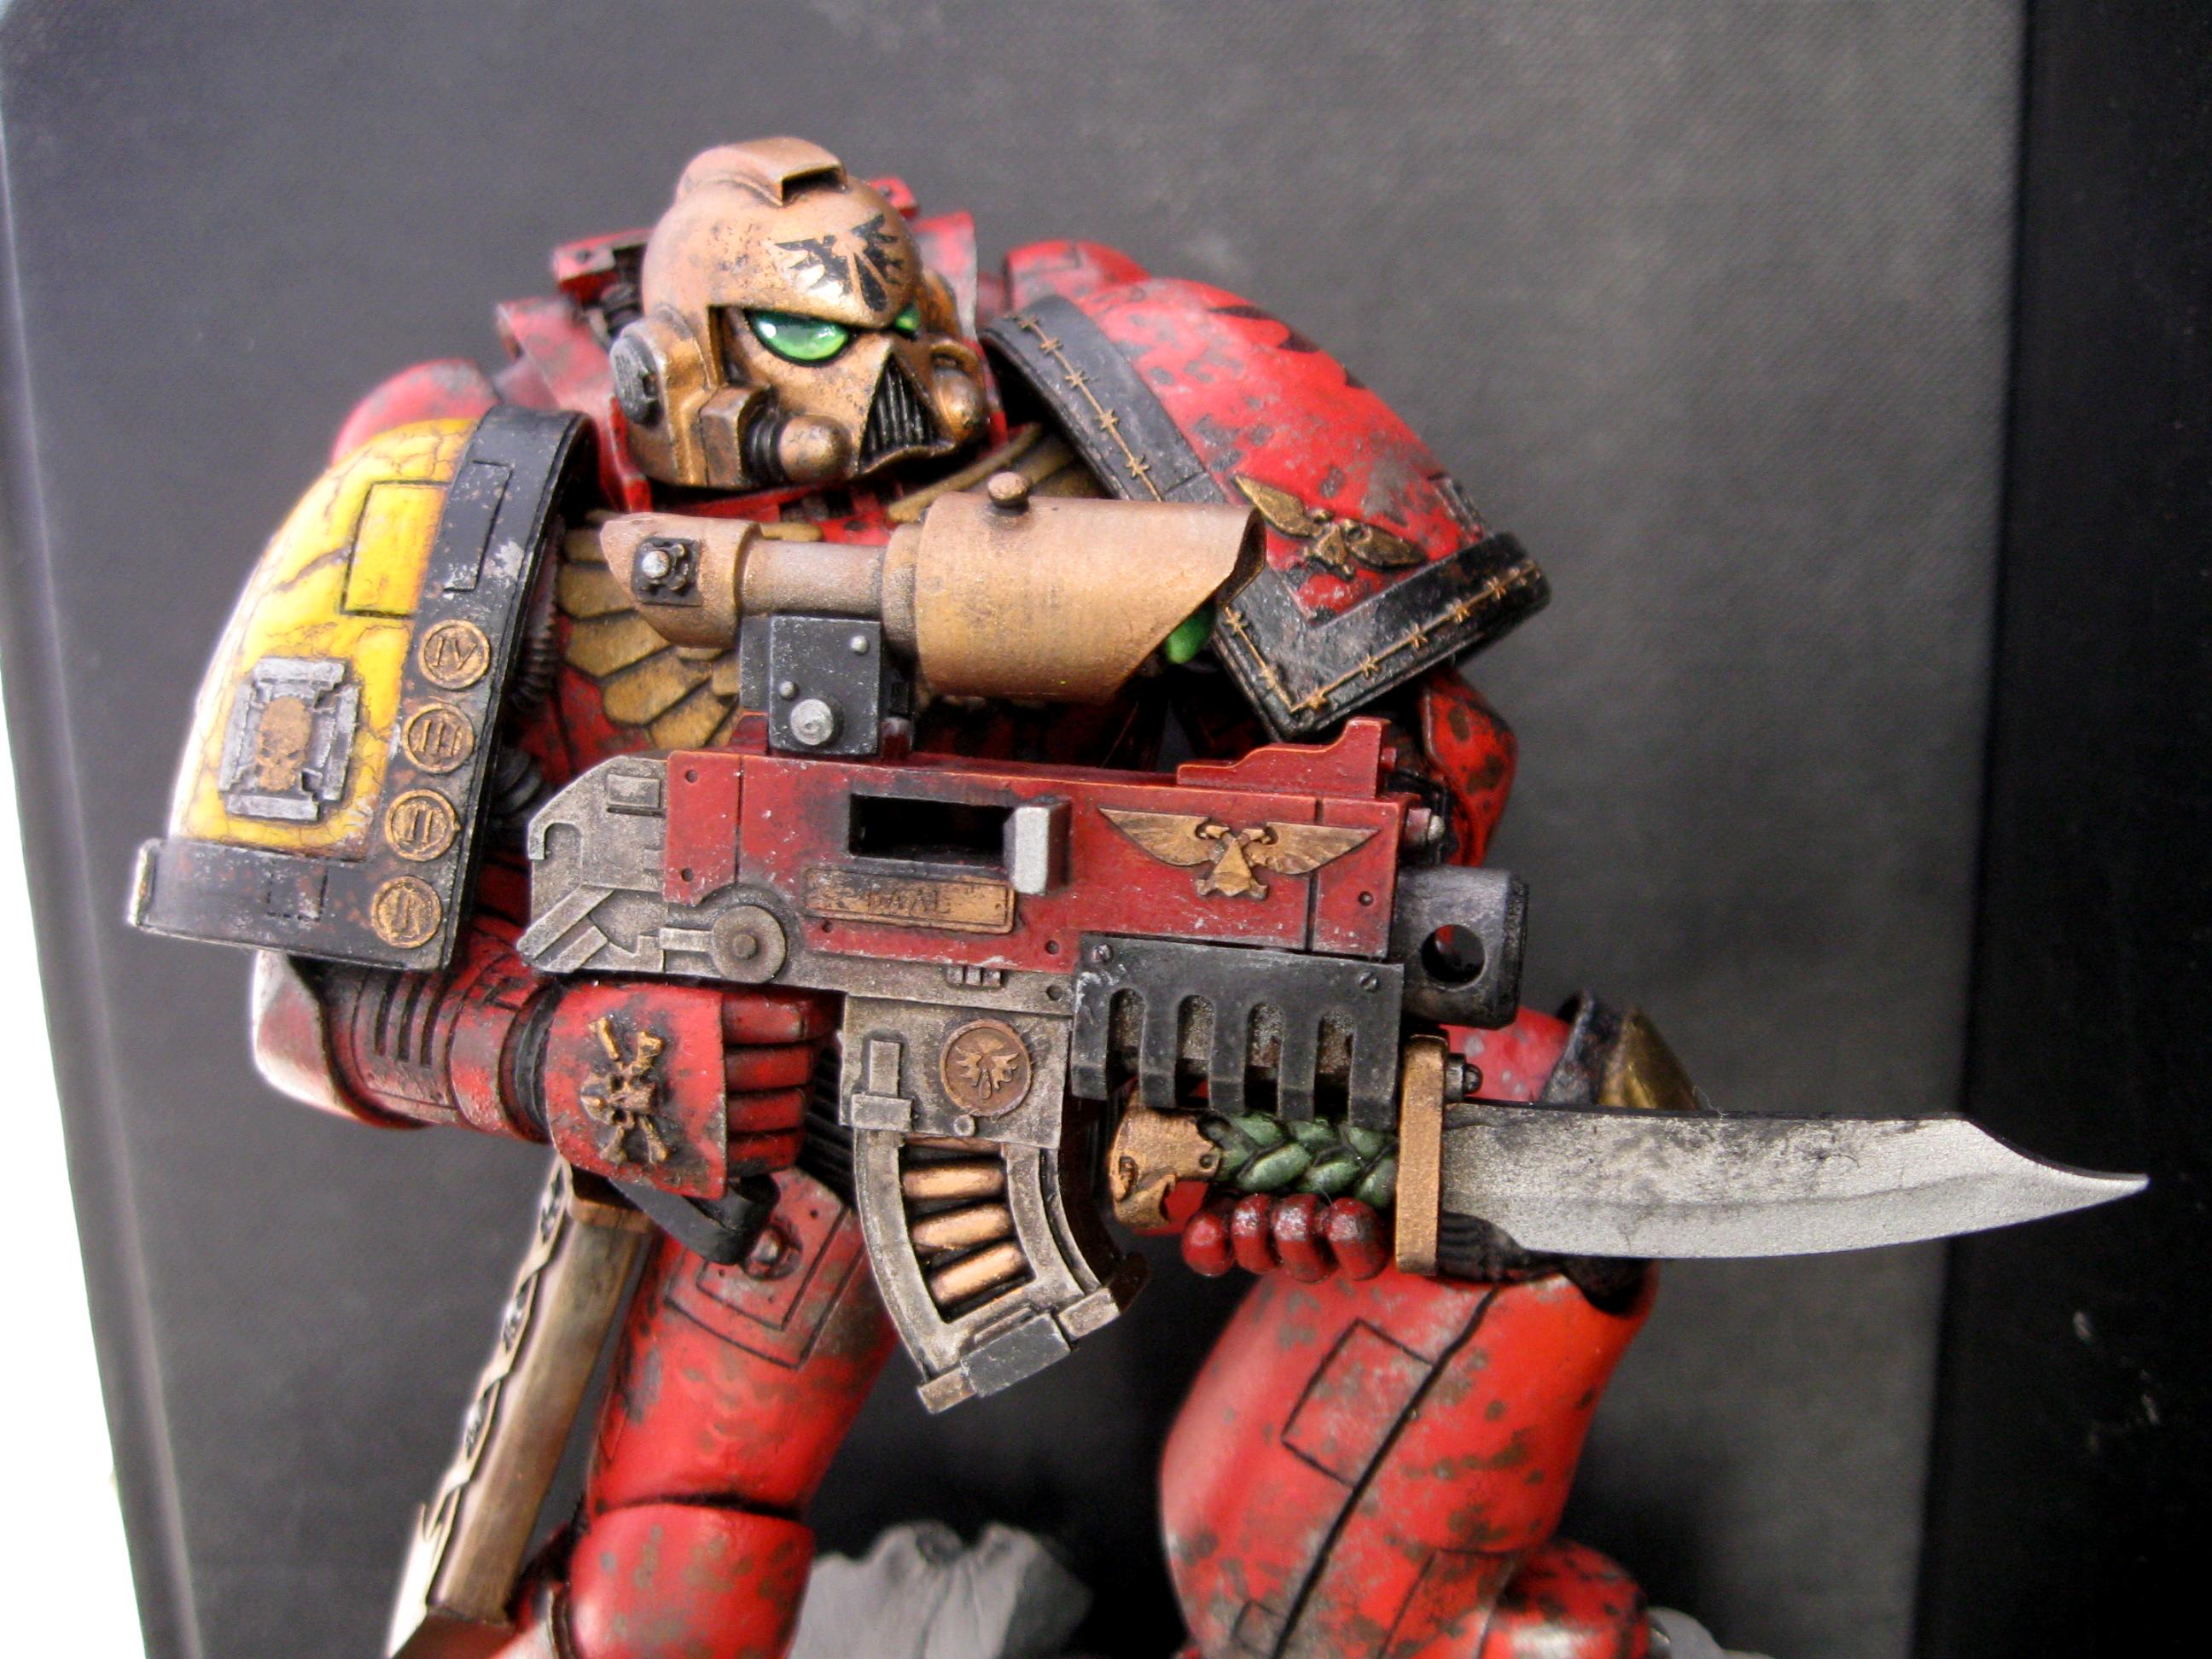 Blood Angels, Forge World, Large, Space Marines, Warhammer 40,000